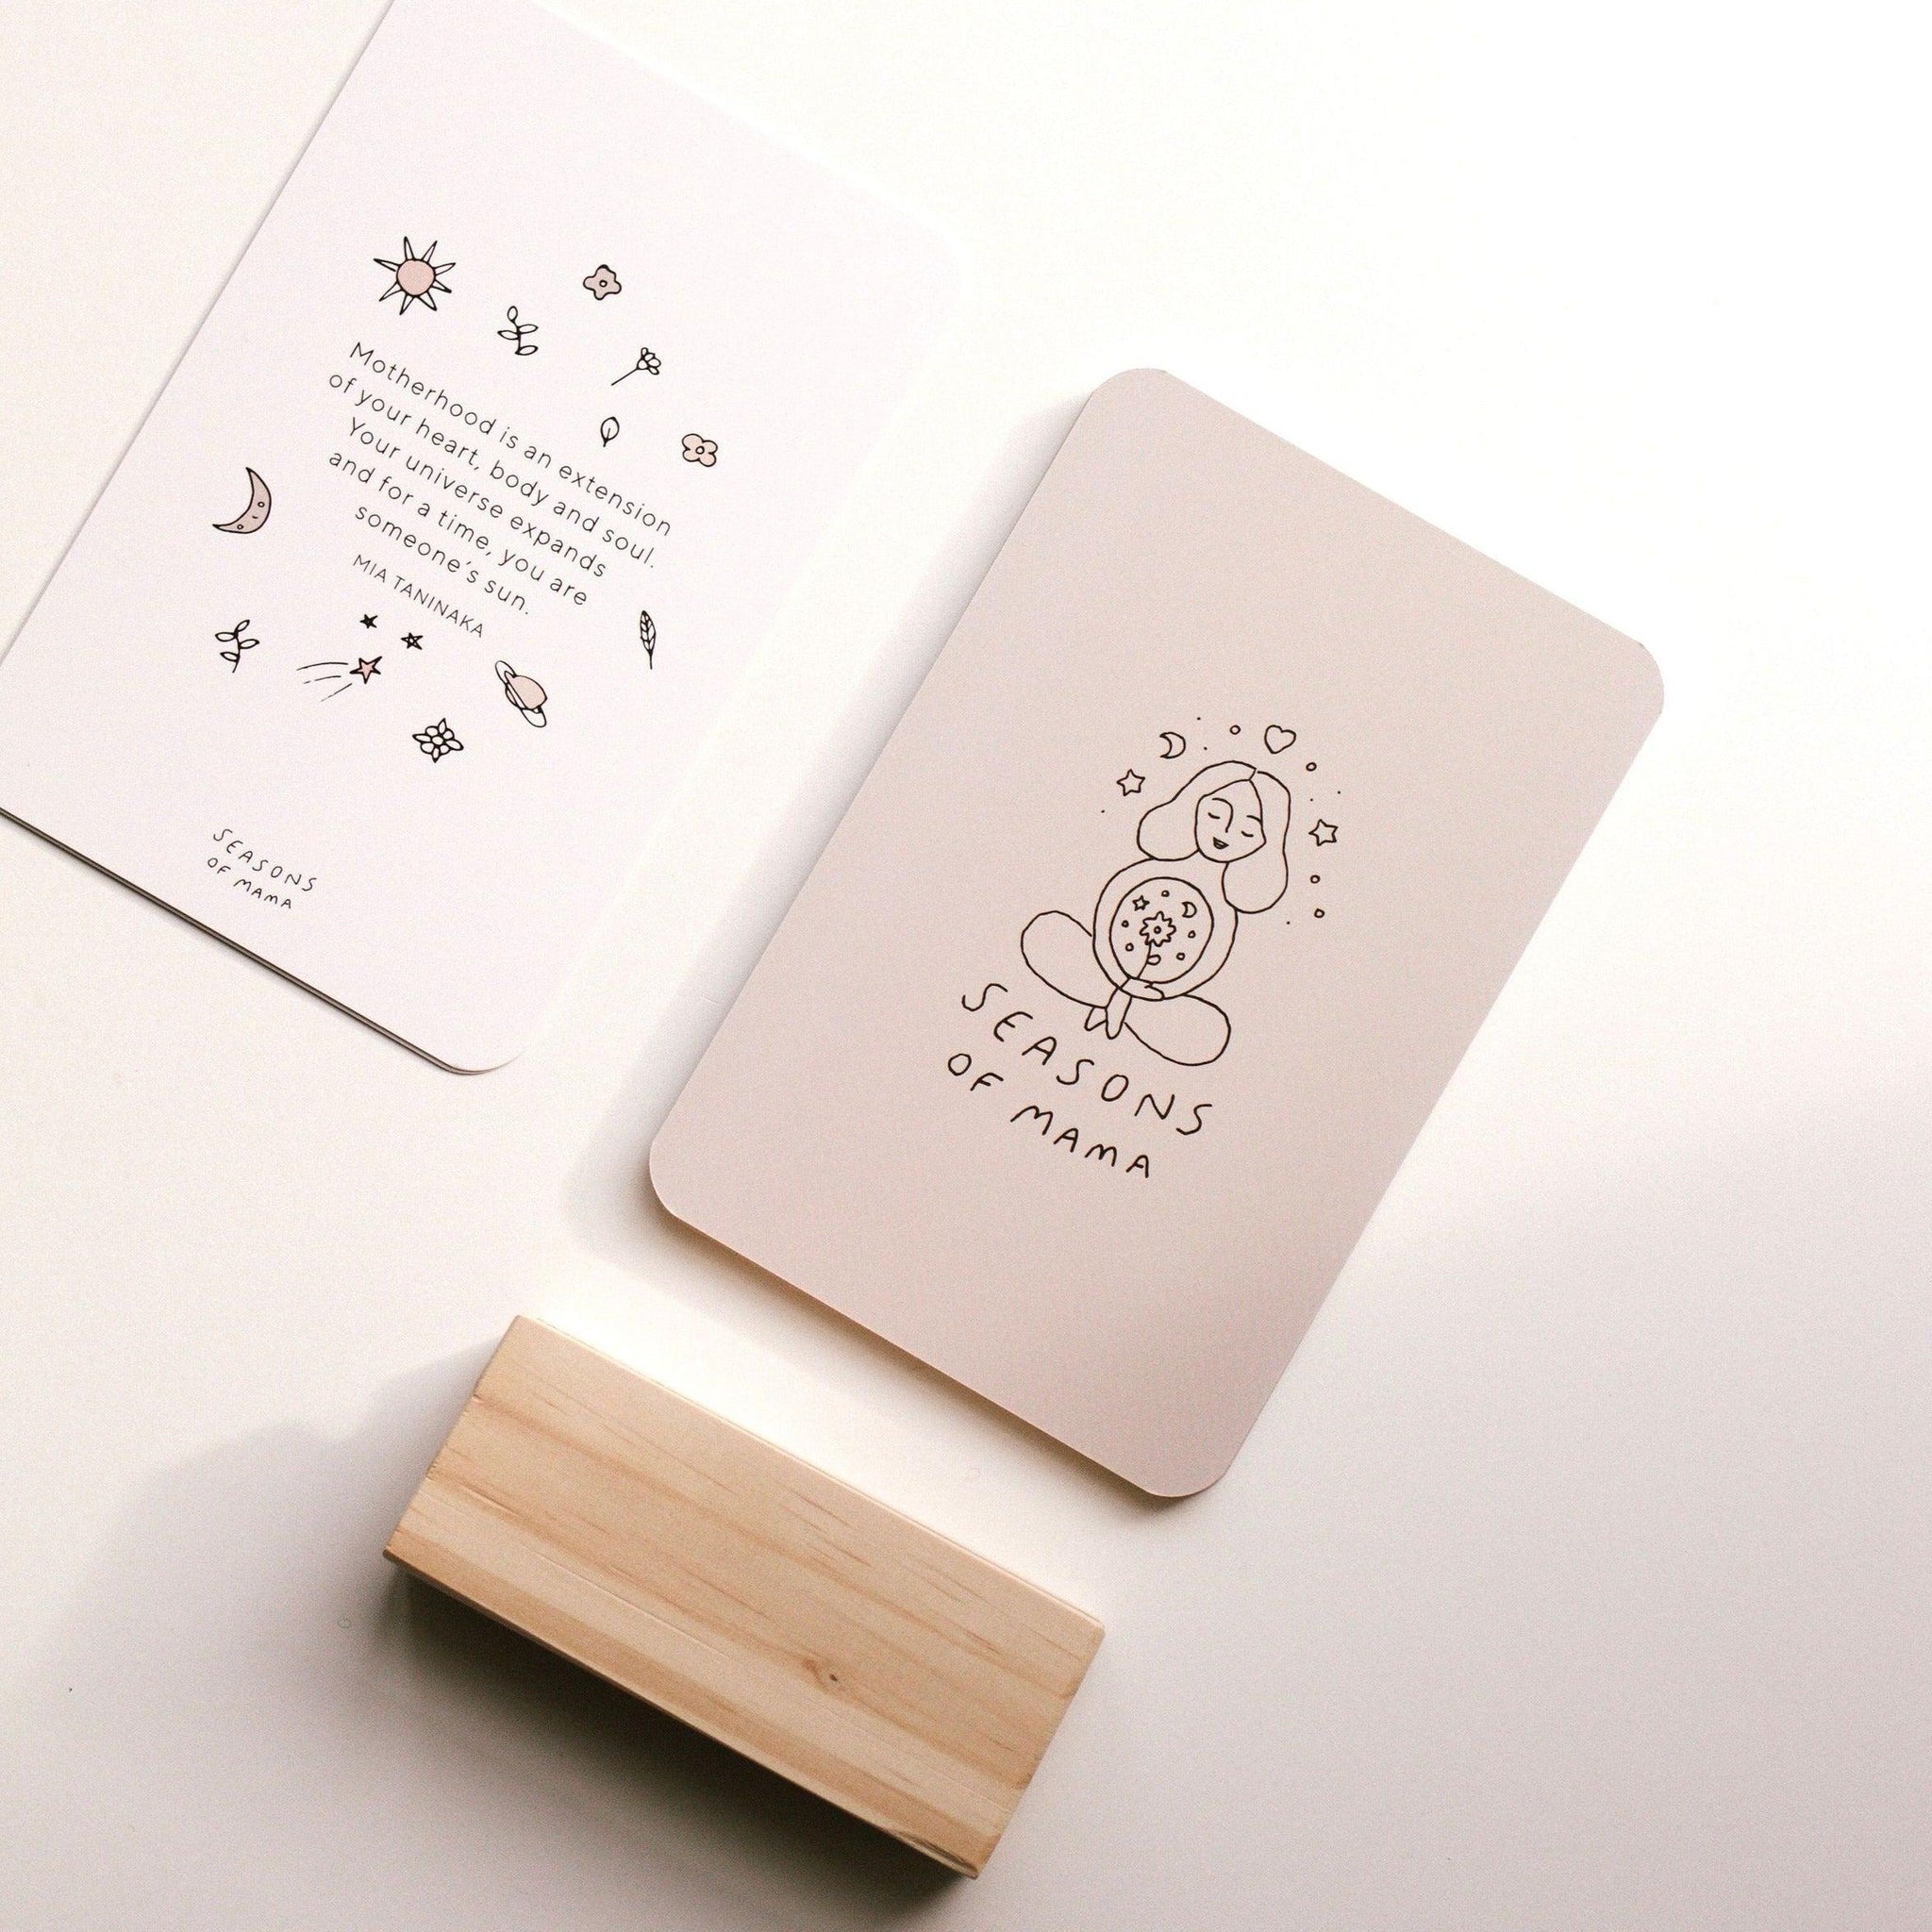 A set of Mama Mantra Cards and a wooden block on a table from Seasons of Mama, featuring motherhood quotes and affirmation cards.